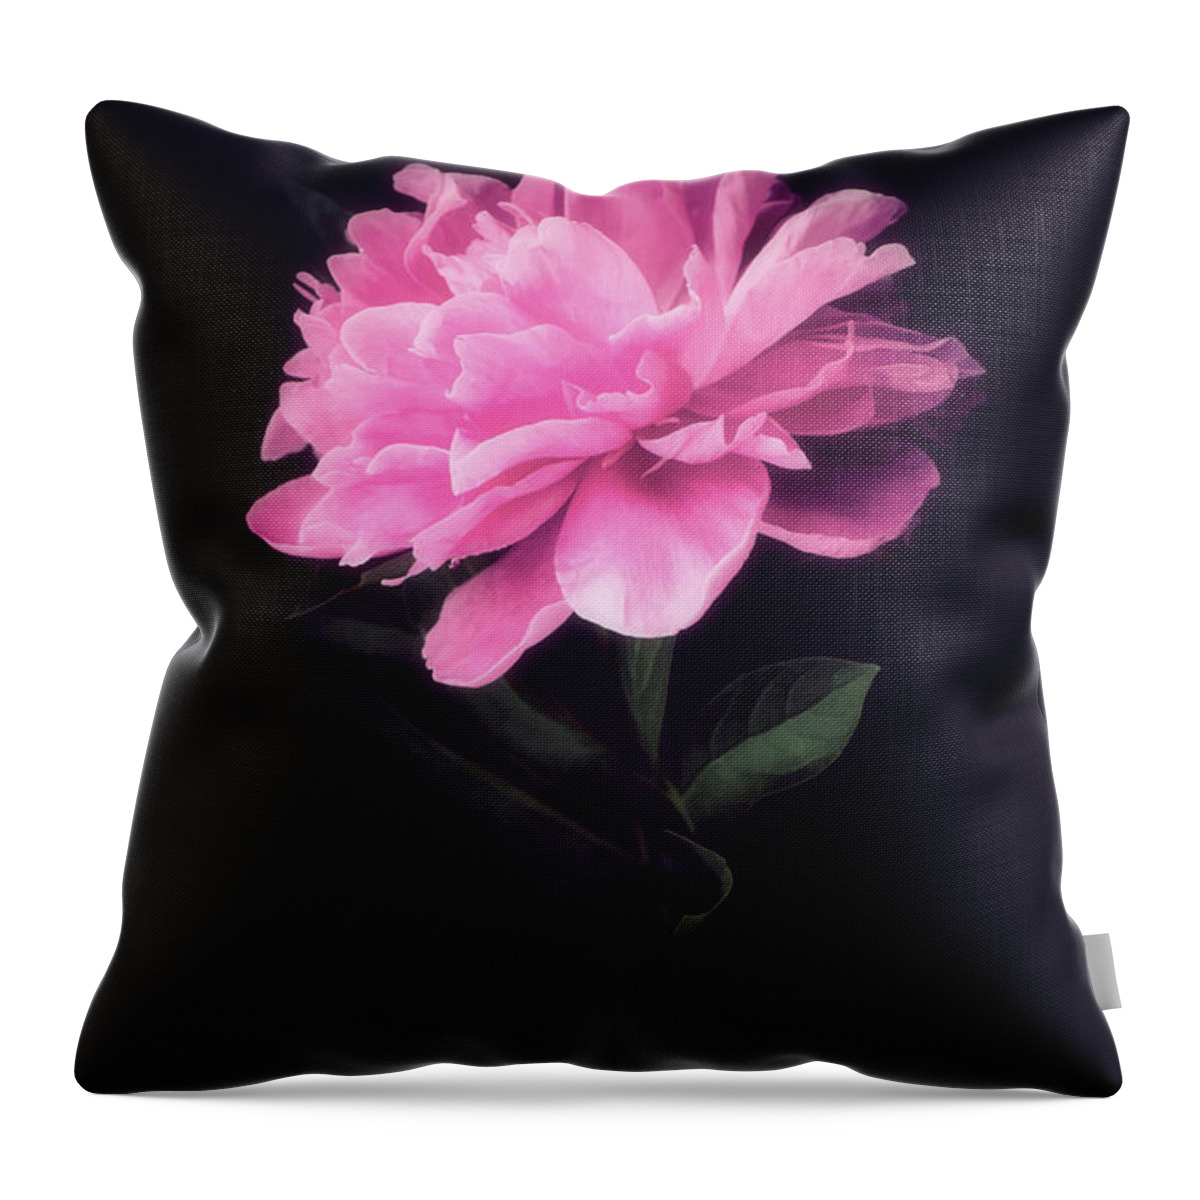 Flower Throw Pillow featuring the photograph Ruffled Peony by Philippe Sainte-Laudy